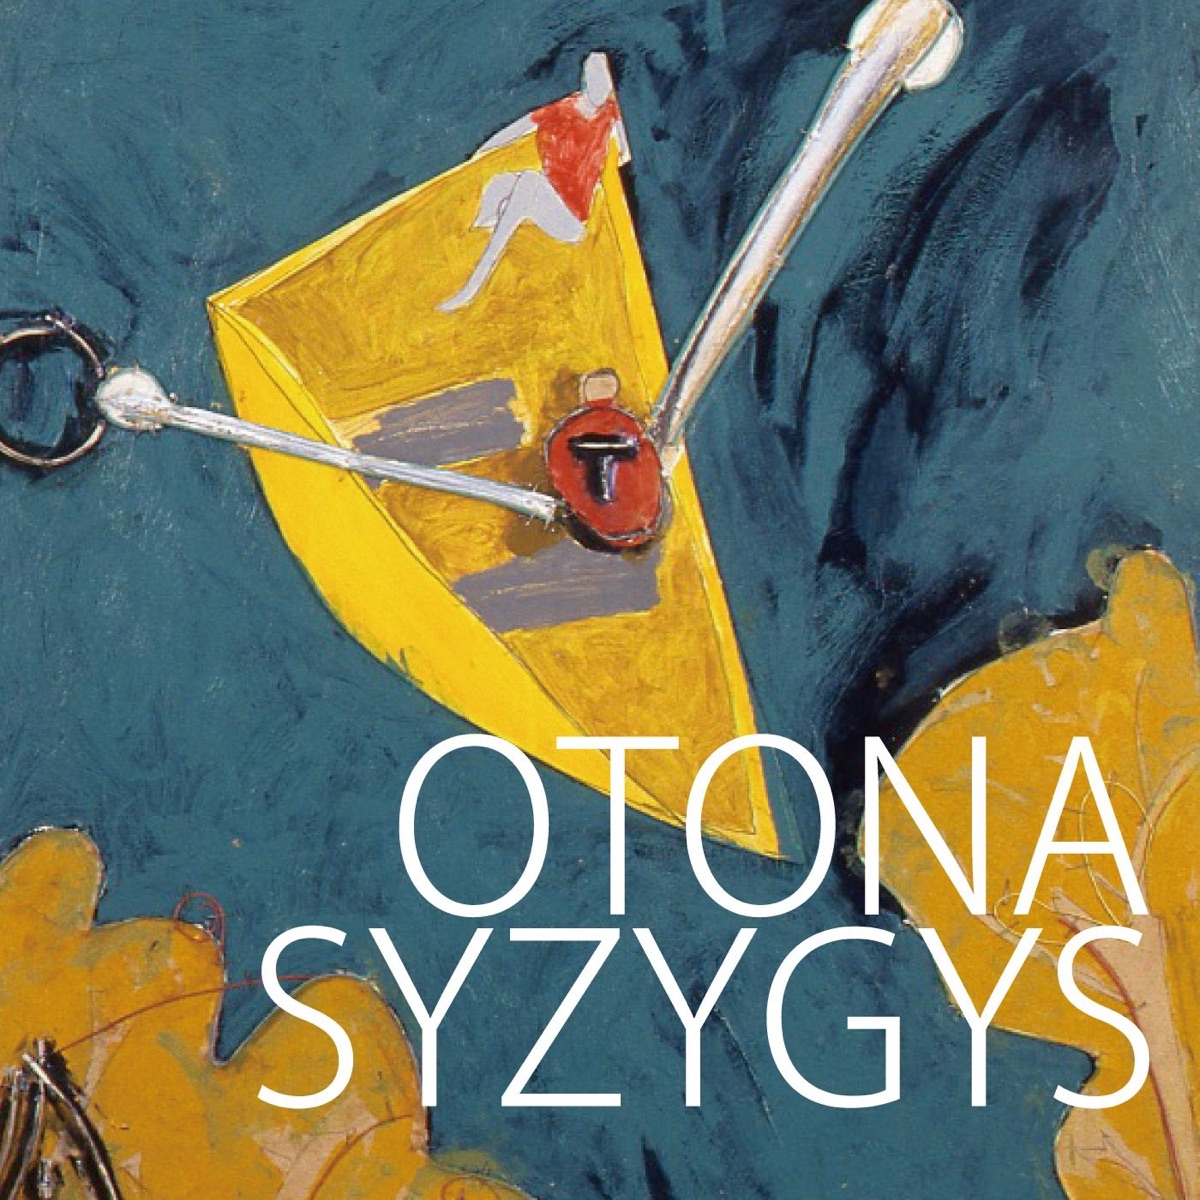 Complete Studio Recordings by Syzygys on iTunes